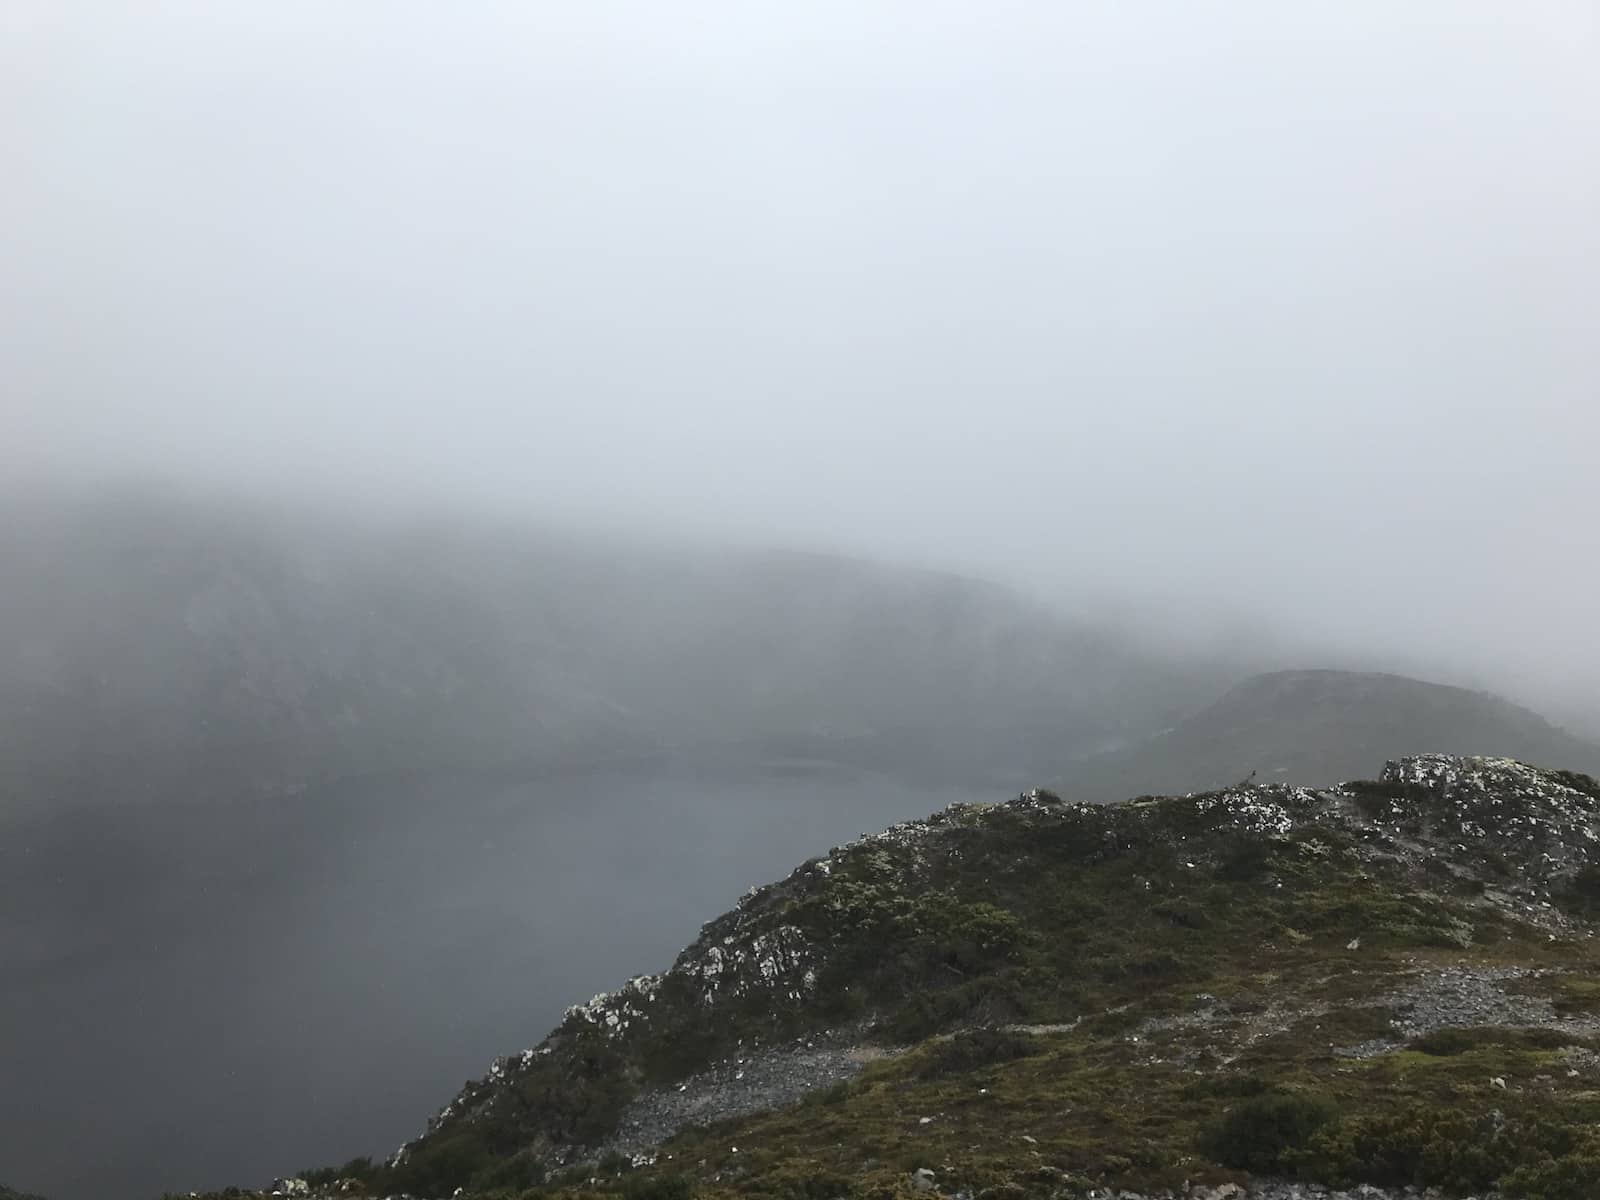 Part of a mountain on a very cloudy day